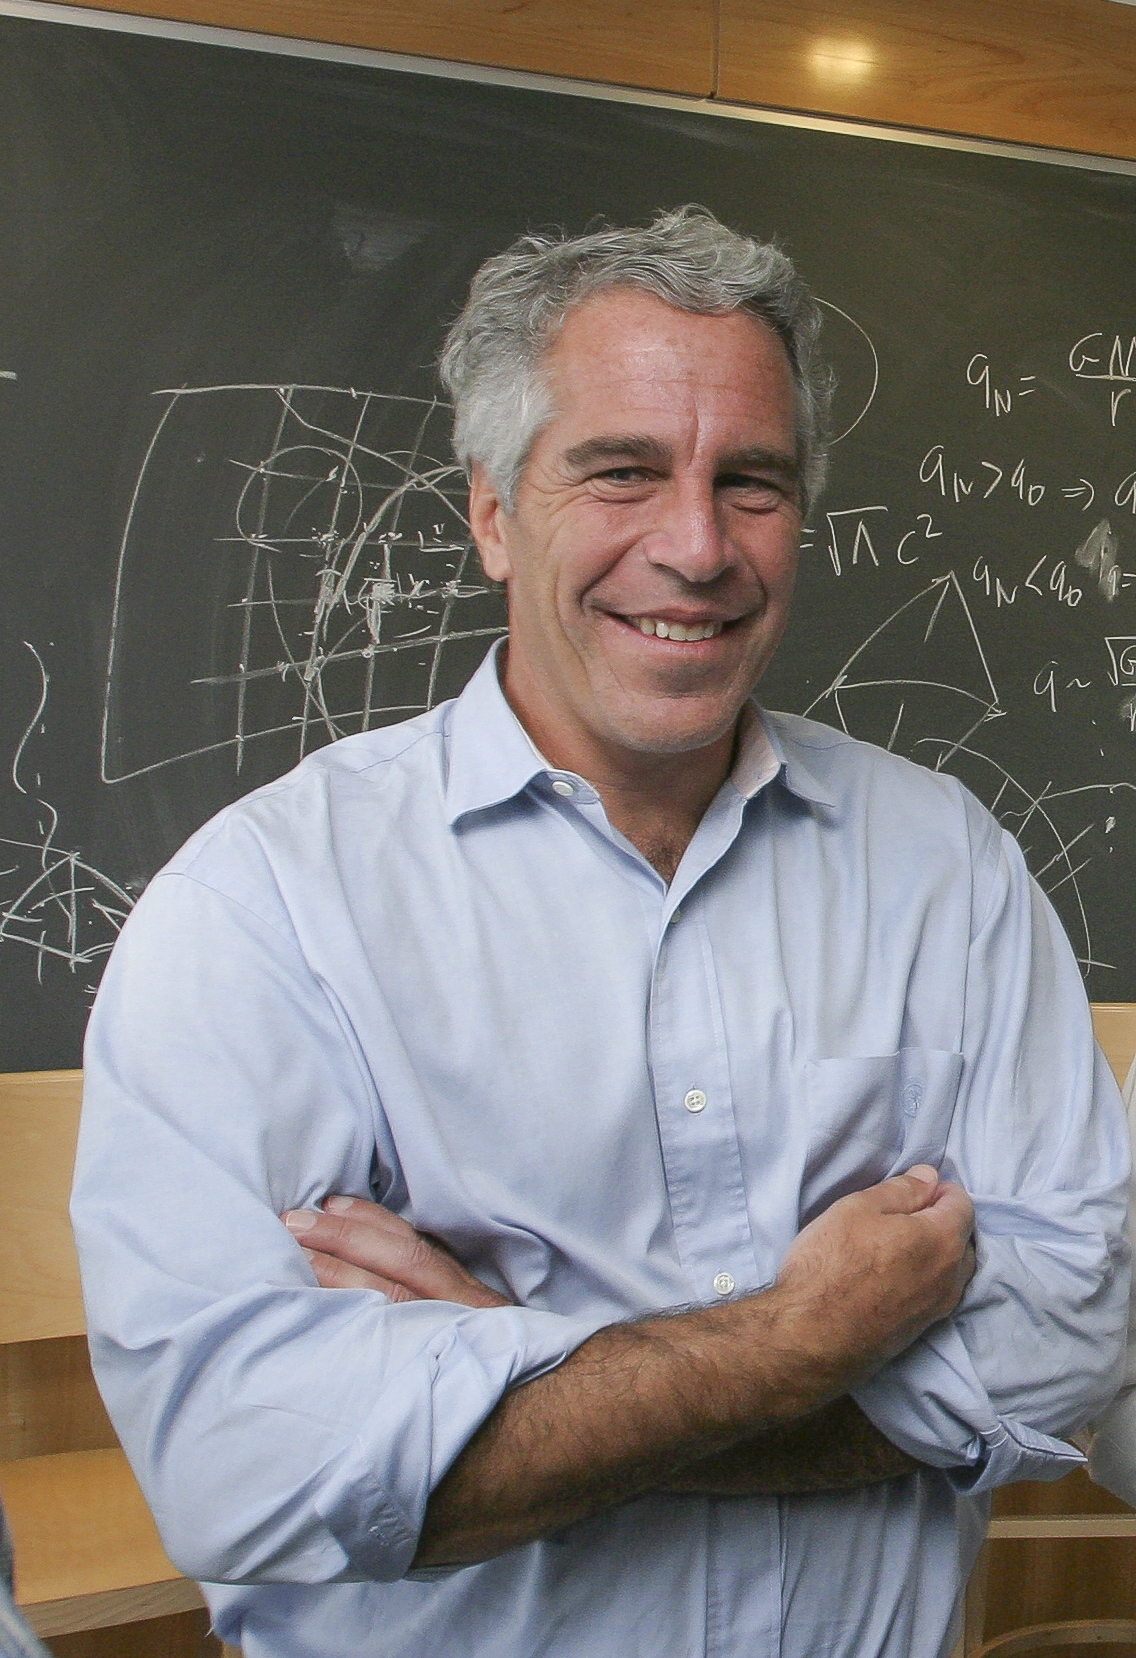 September 8, 2004 - Cambridge, Massachusetts, United States: Jeffrey Epstein at Harvard University for an annual End of the Summer event, he Program for Evolutionary Dynamics. In 1982, Epstein founded his own financial management firm, J. Epstein & Co. managing the assets of clients with more than US billion in net worth. In June 2008, after Epstein pleaded guilty to a single state charge of soliciting prostitution from girls as young as 14, he was sentenced to 18 months in prison. Instead of being sent to state prison like the majority of sex offenders convicted in Florida, Epstein was housed in a private wing of the Palm Beach County stockade. He was able to hire his own security detail and was allowed 